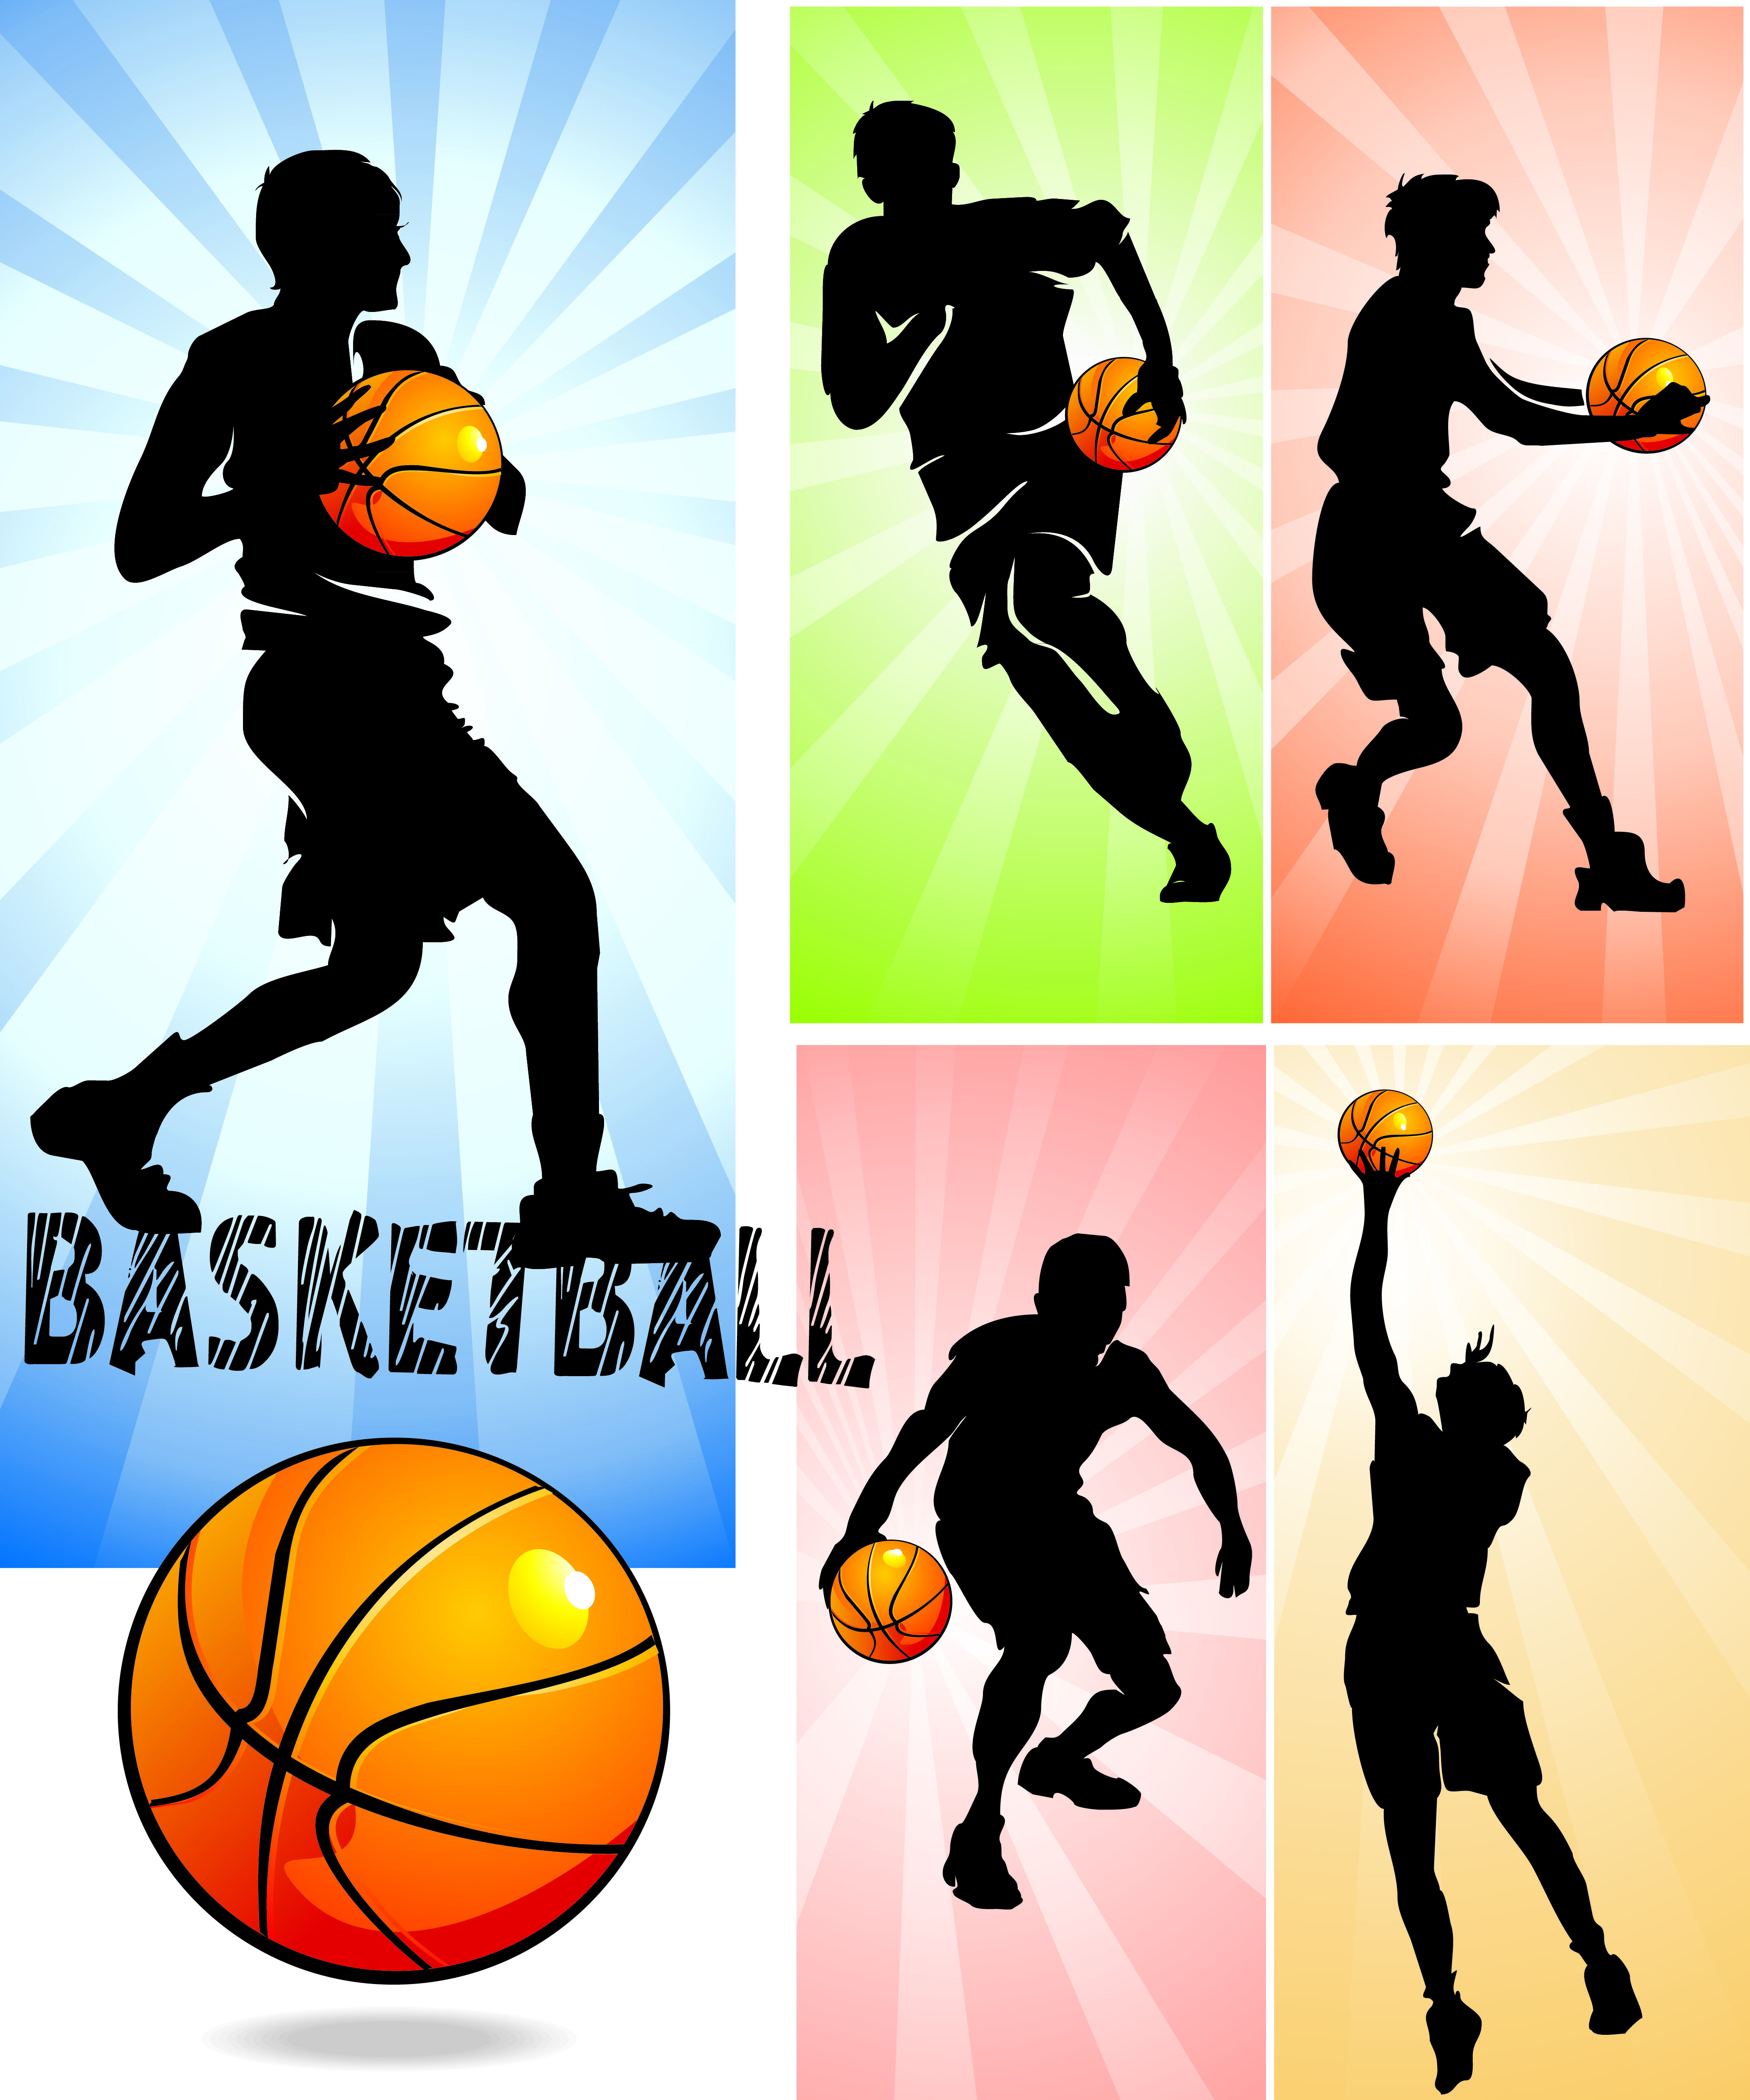 Basketball silhouette character vector Free Vector / 4Vector